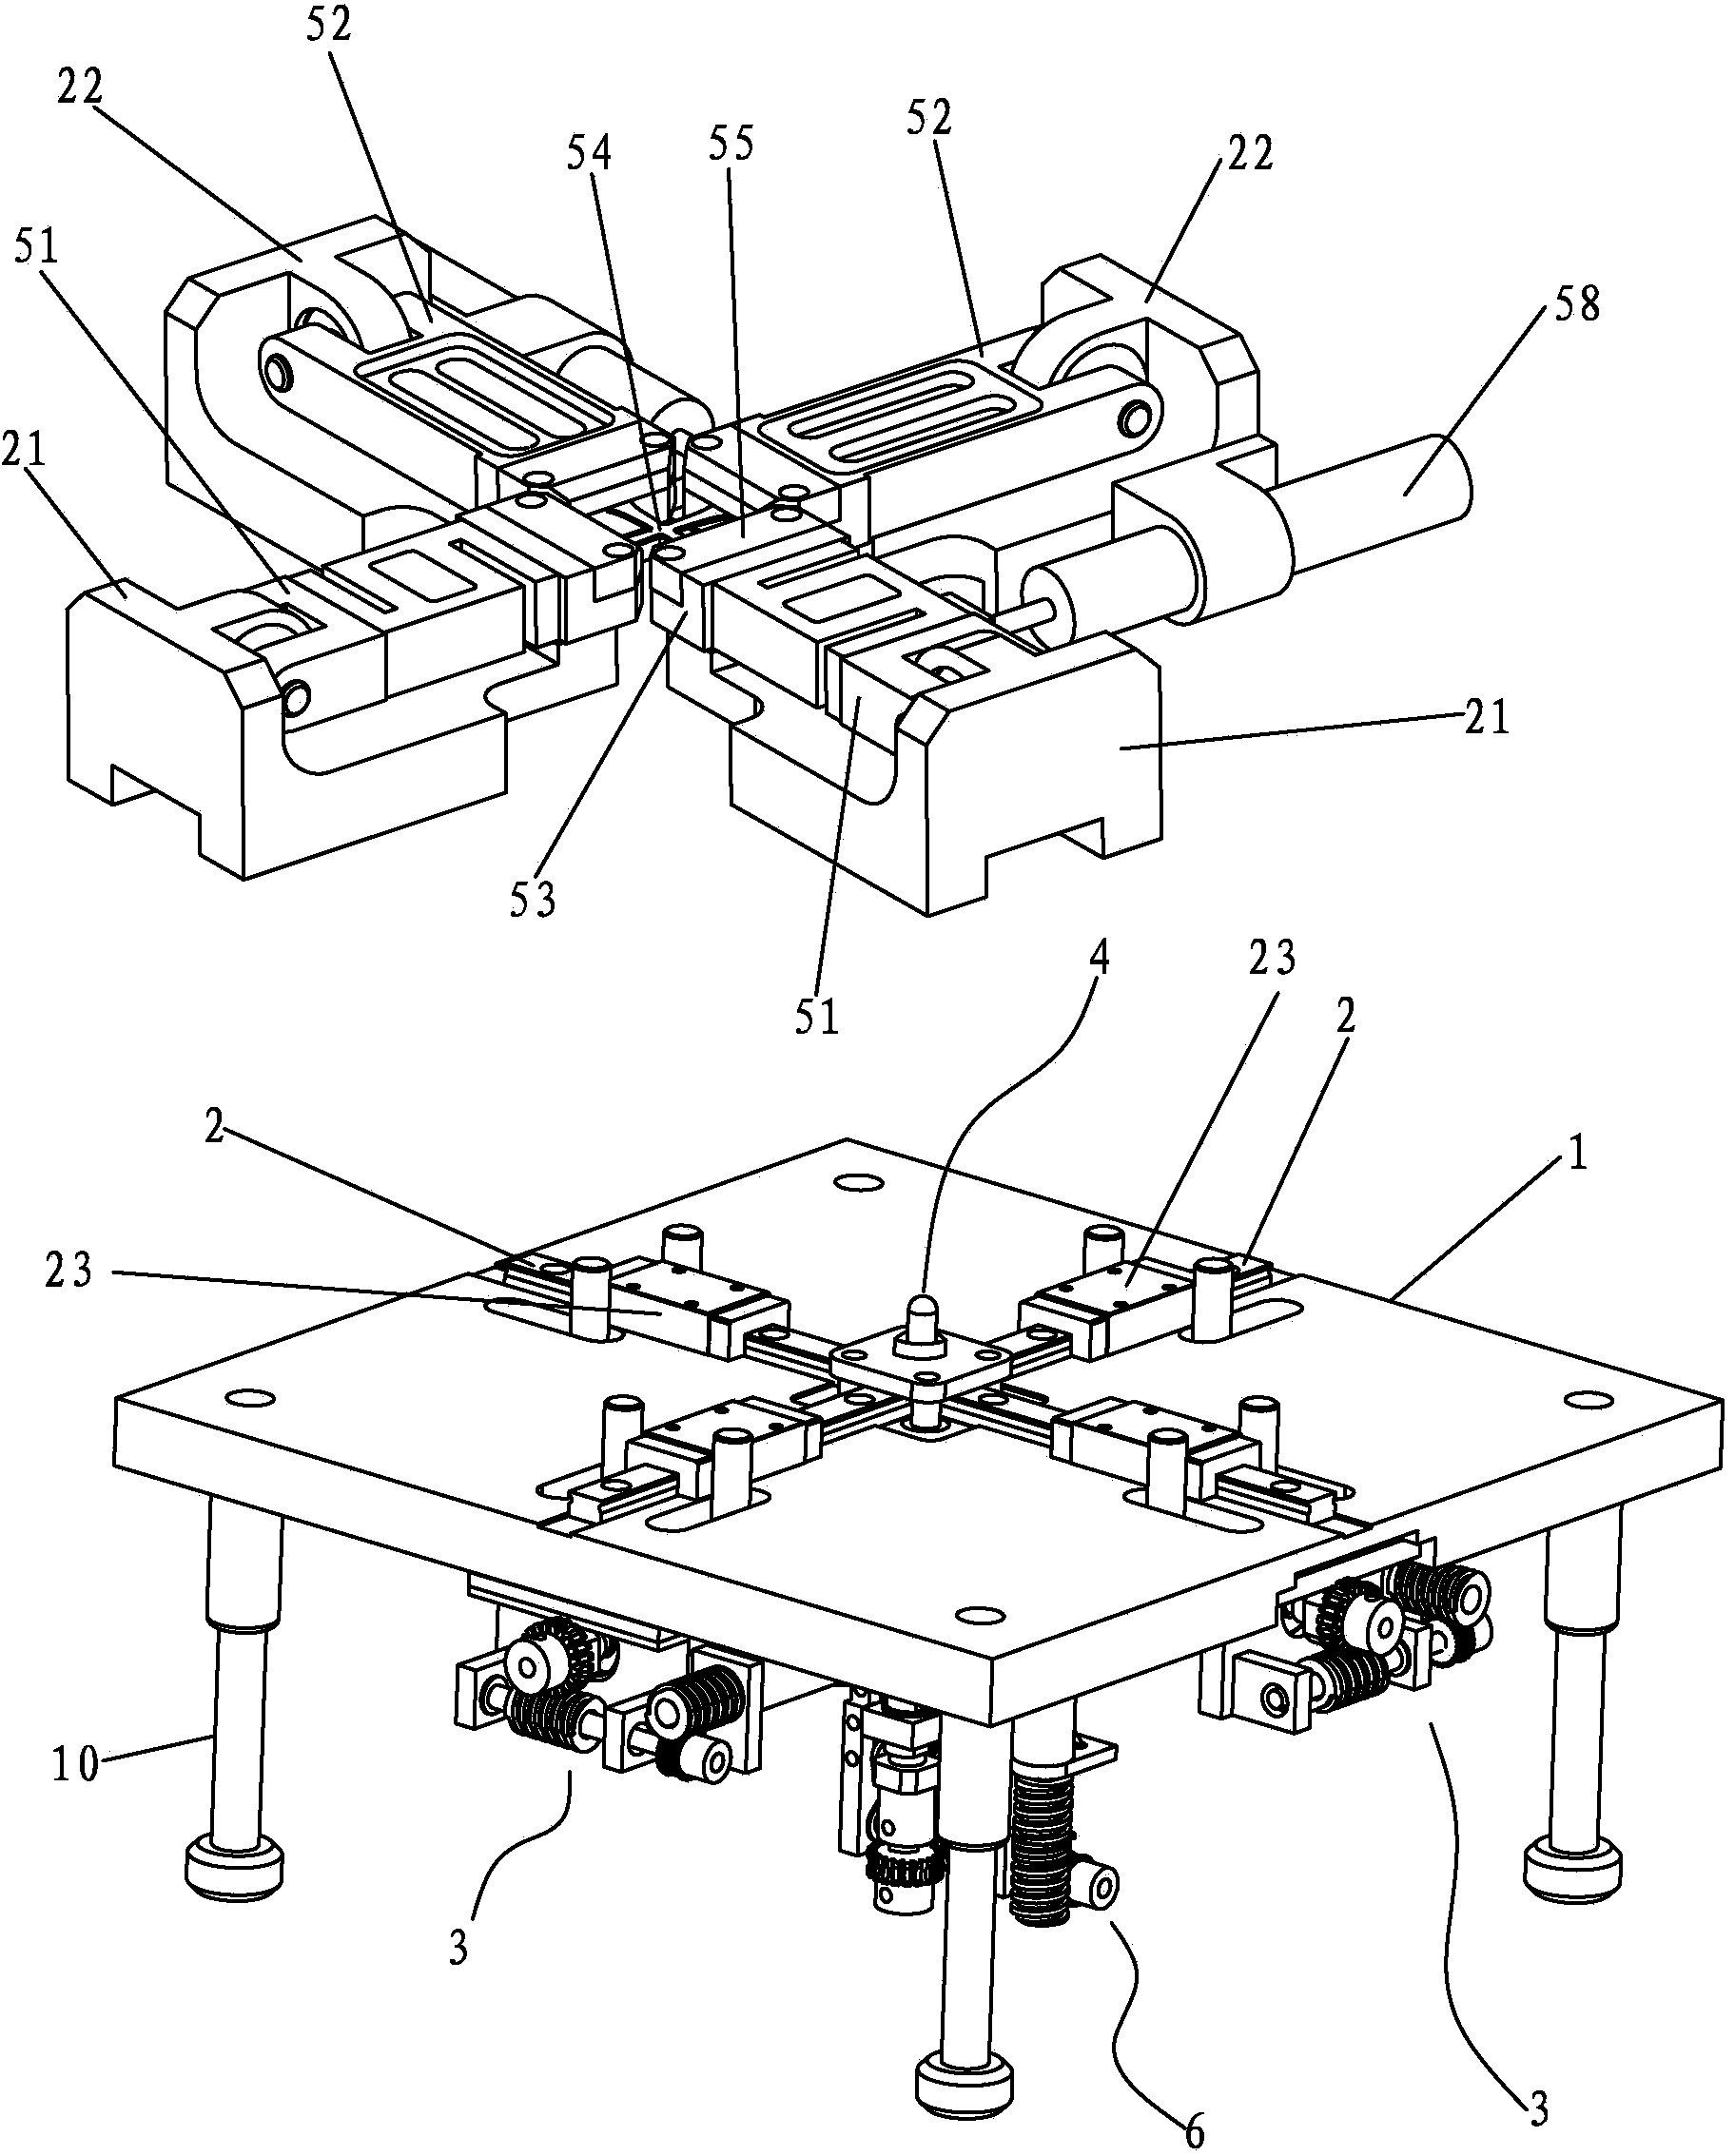 Testing device for mechanical property of material